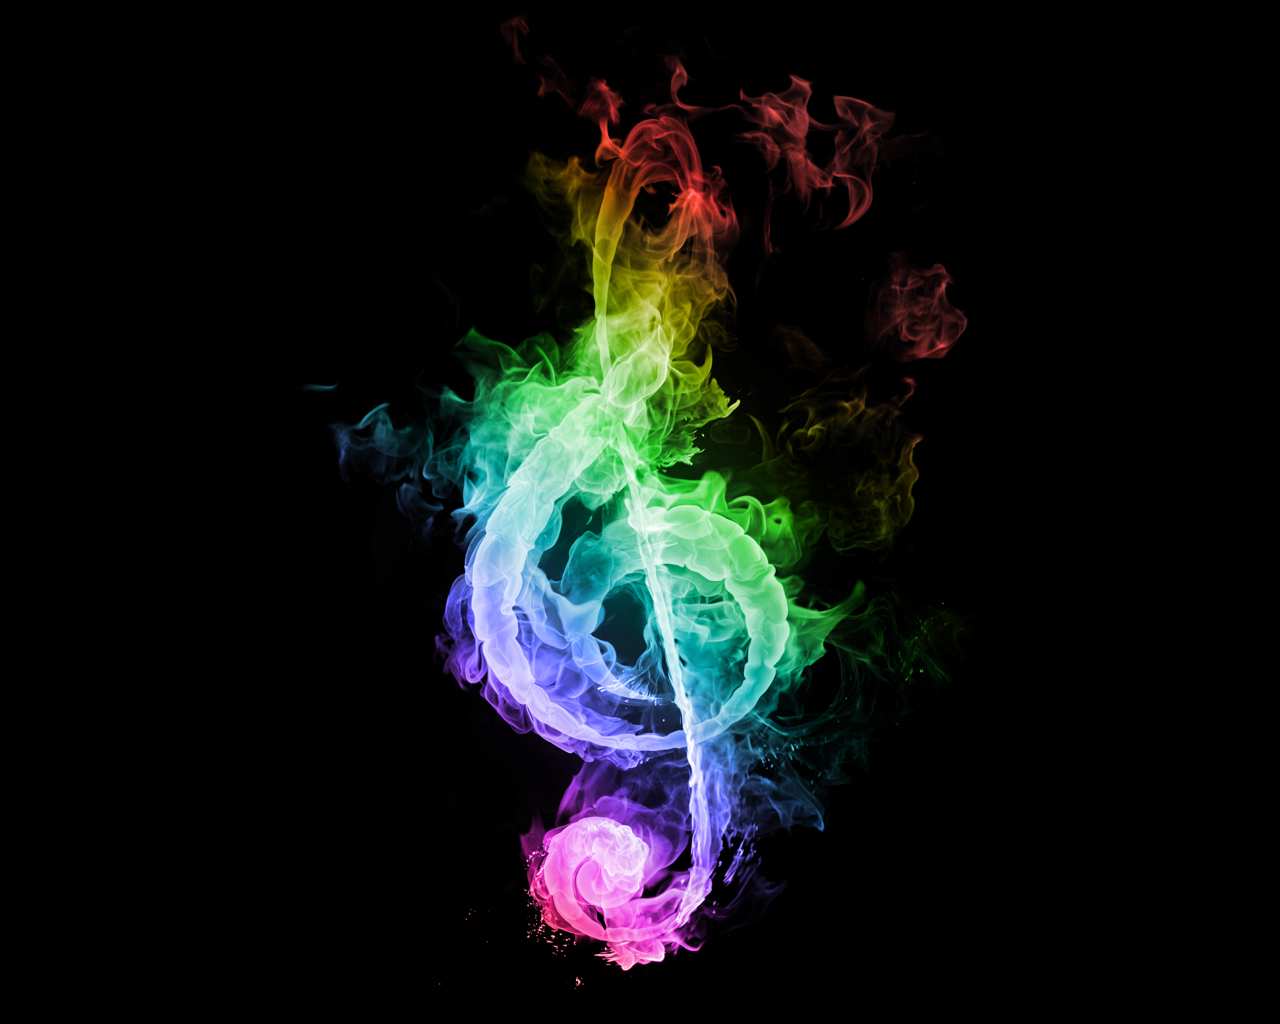 cool music backgrounds wallpapers